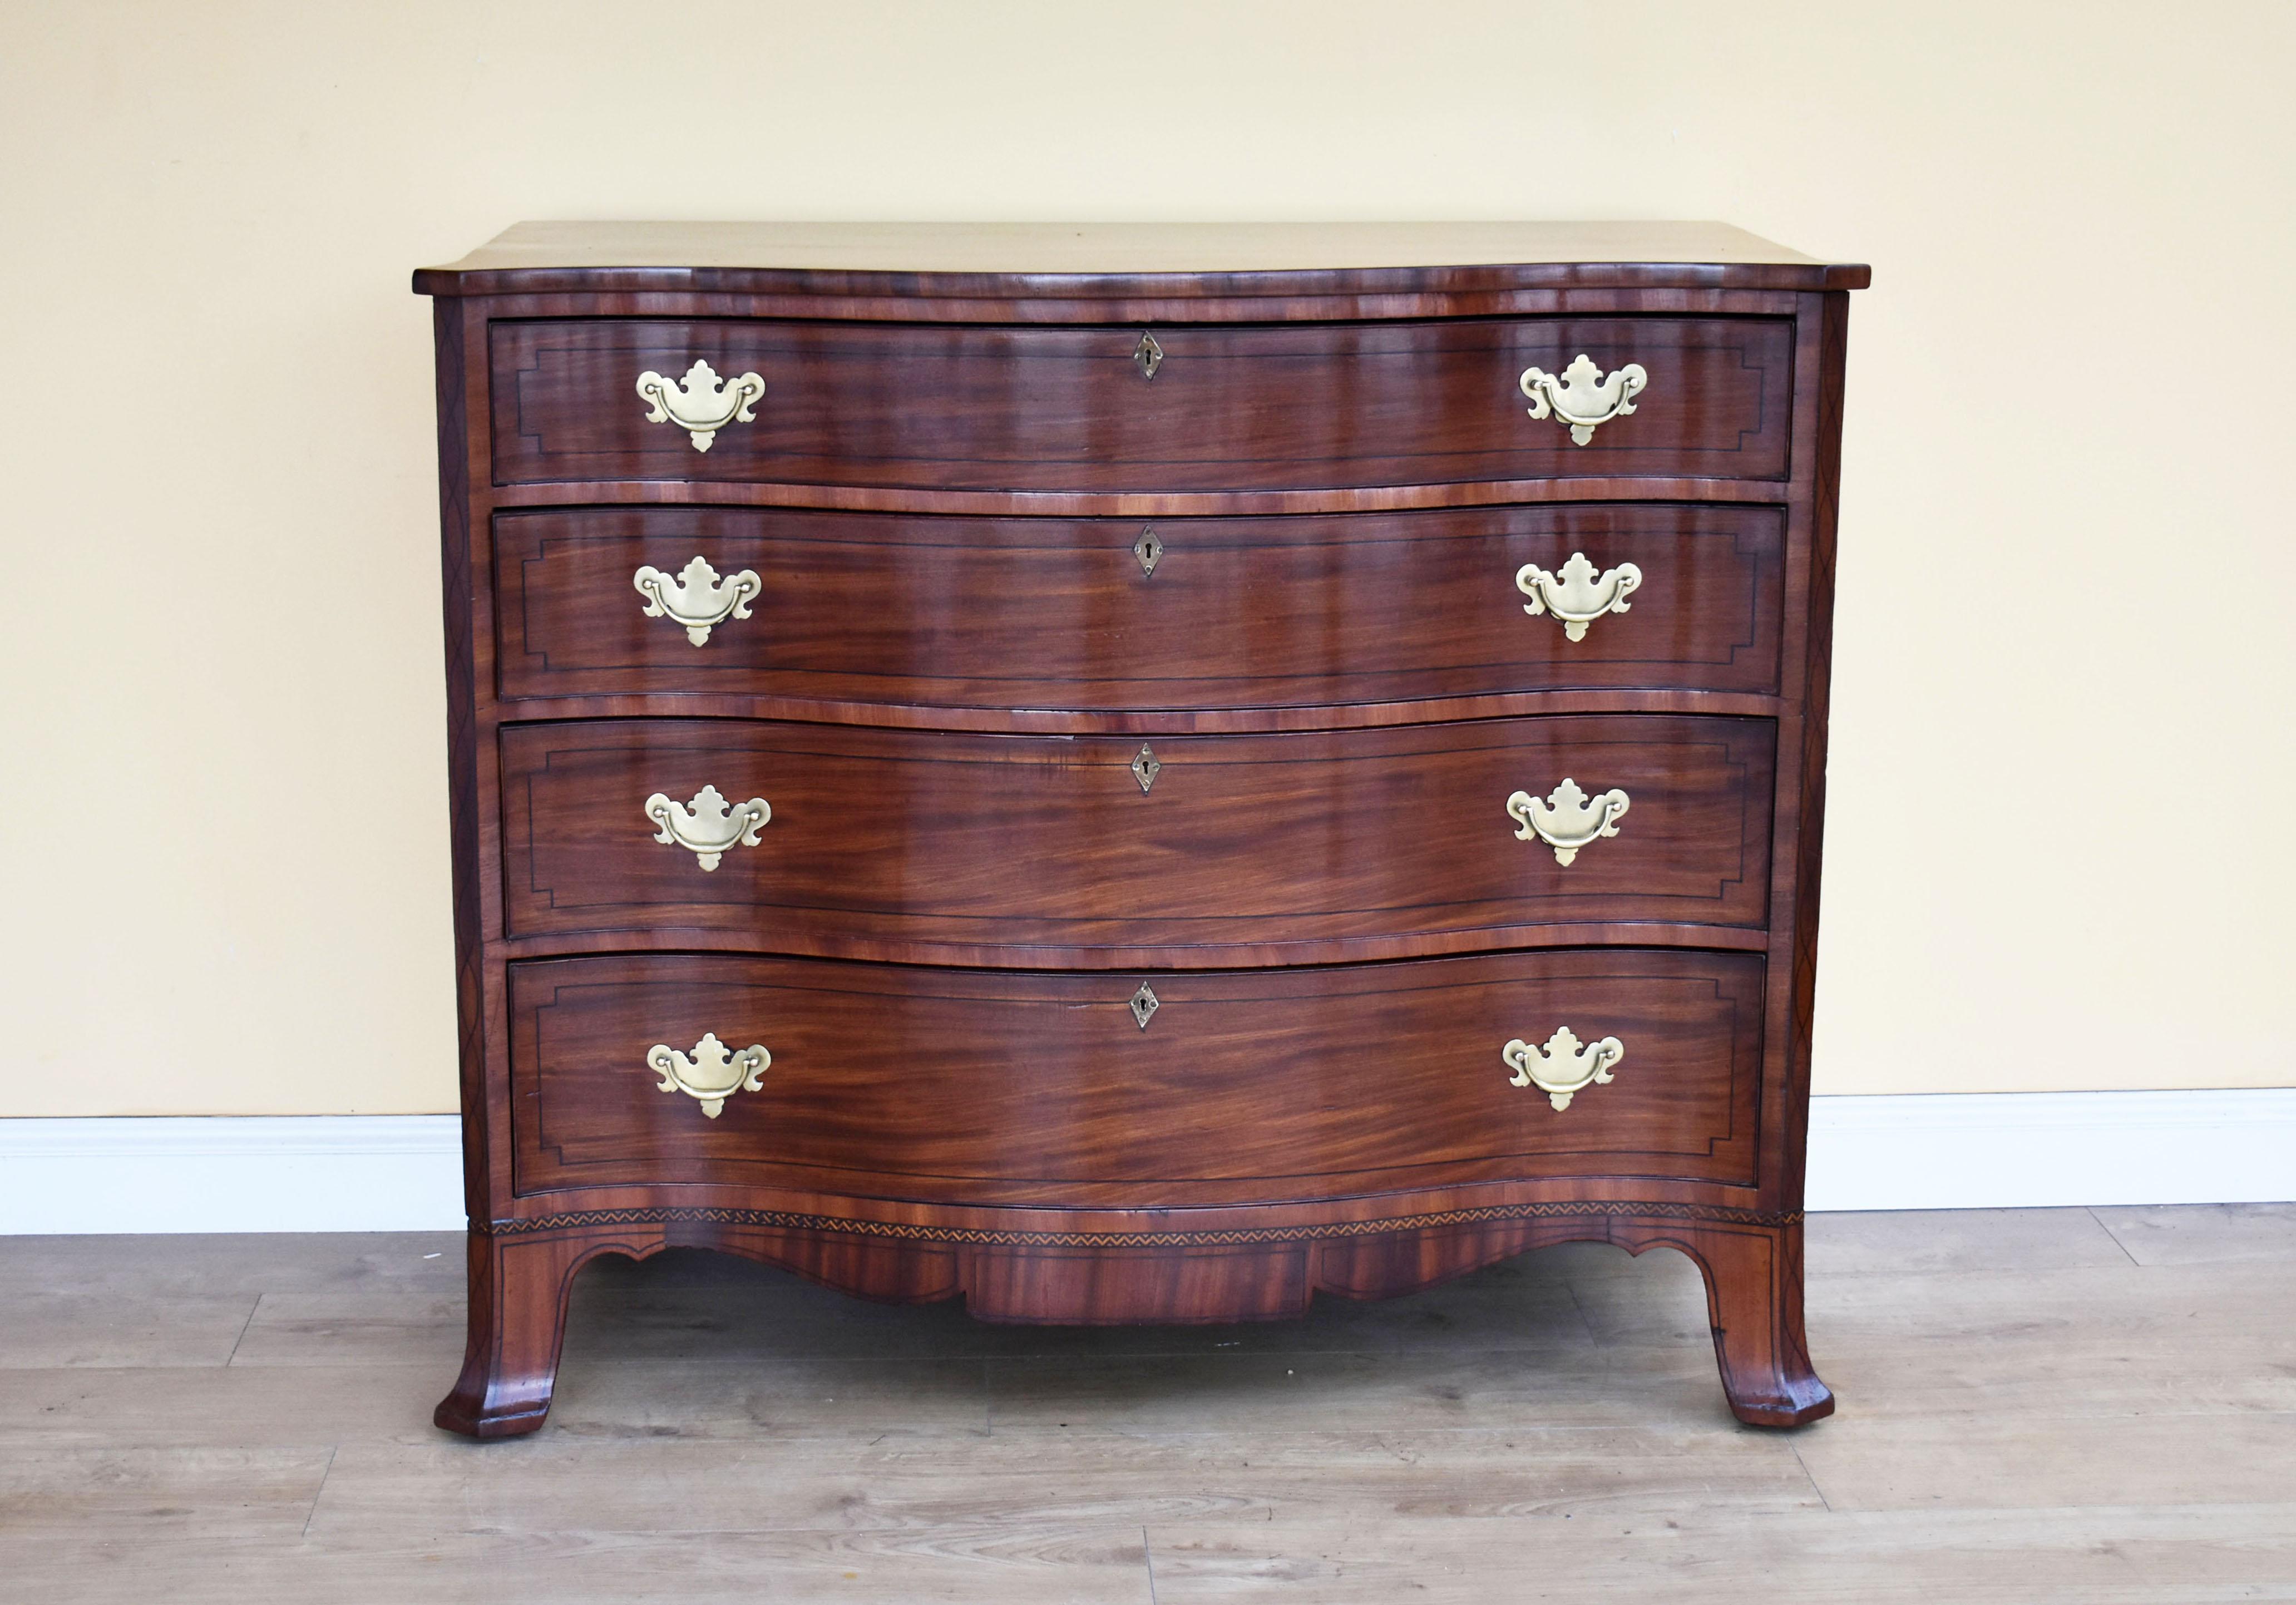 For sale is a good quality George III mahogany serpentine chest of drawers. The chest has four graduated drawers, each with brass handles and escutcheons also with ebony stringing inlay. The chest stands on serpentine feet and is in excellent